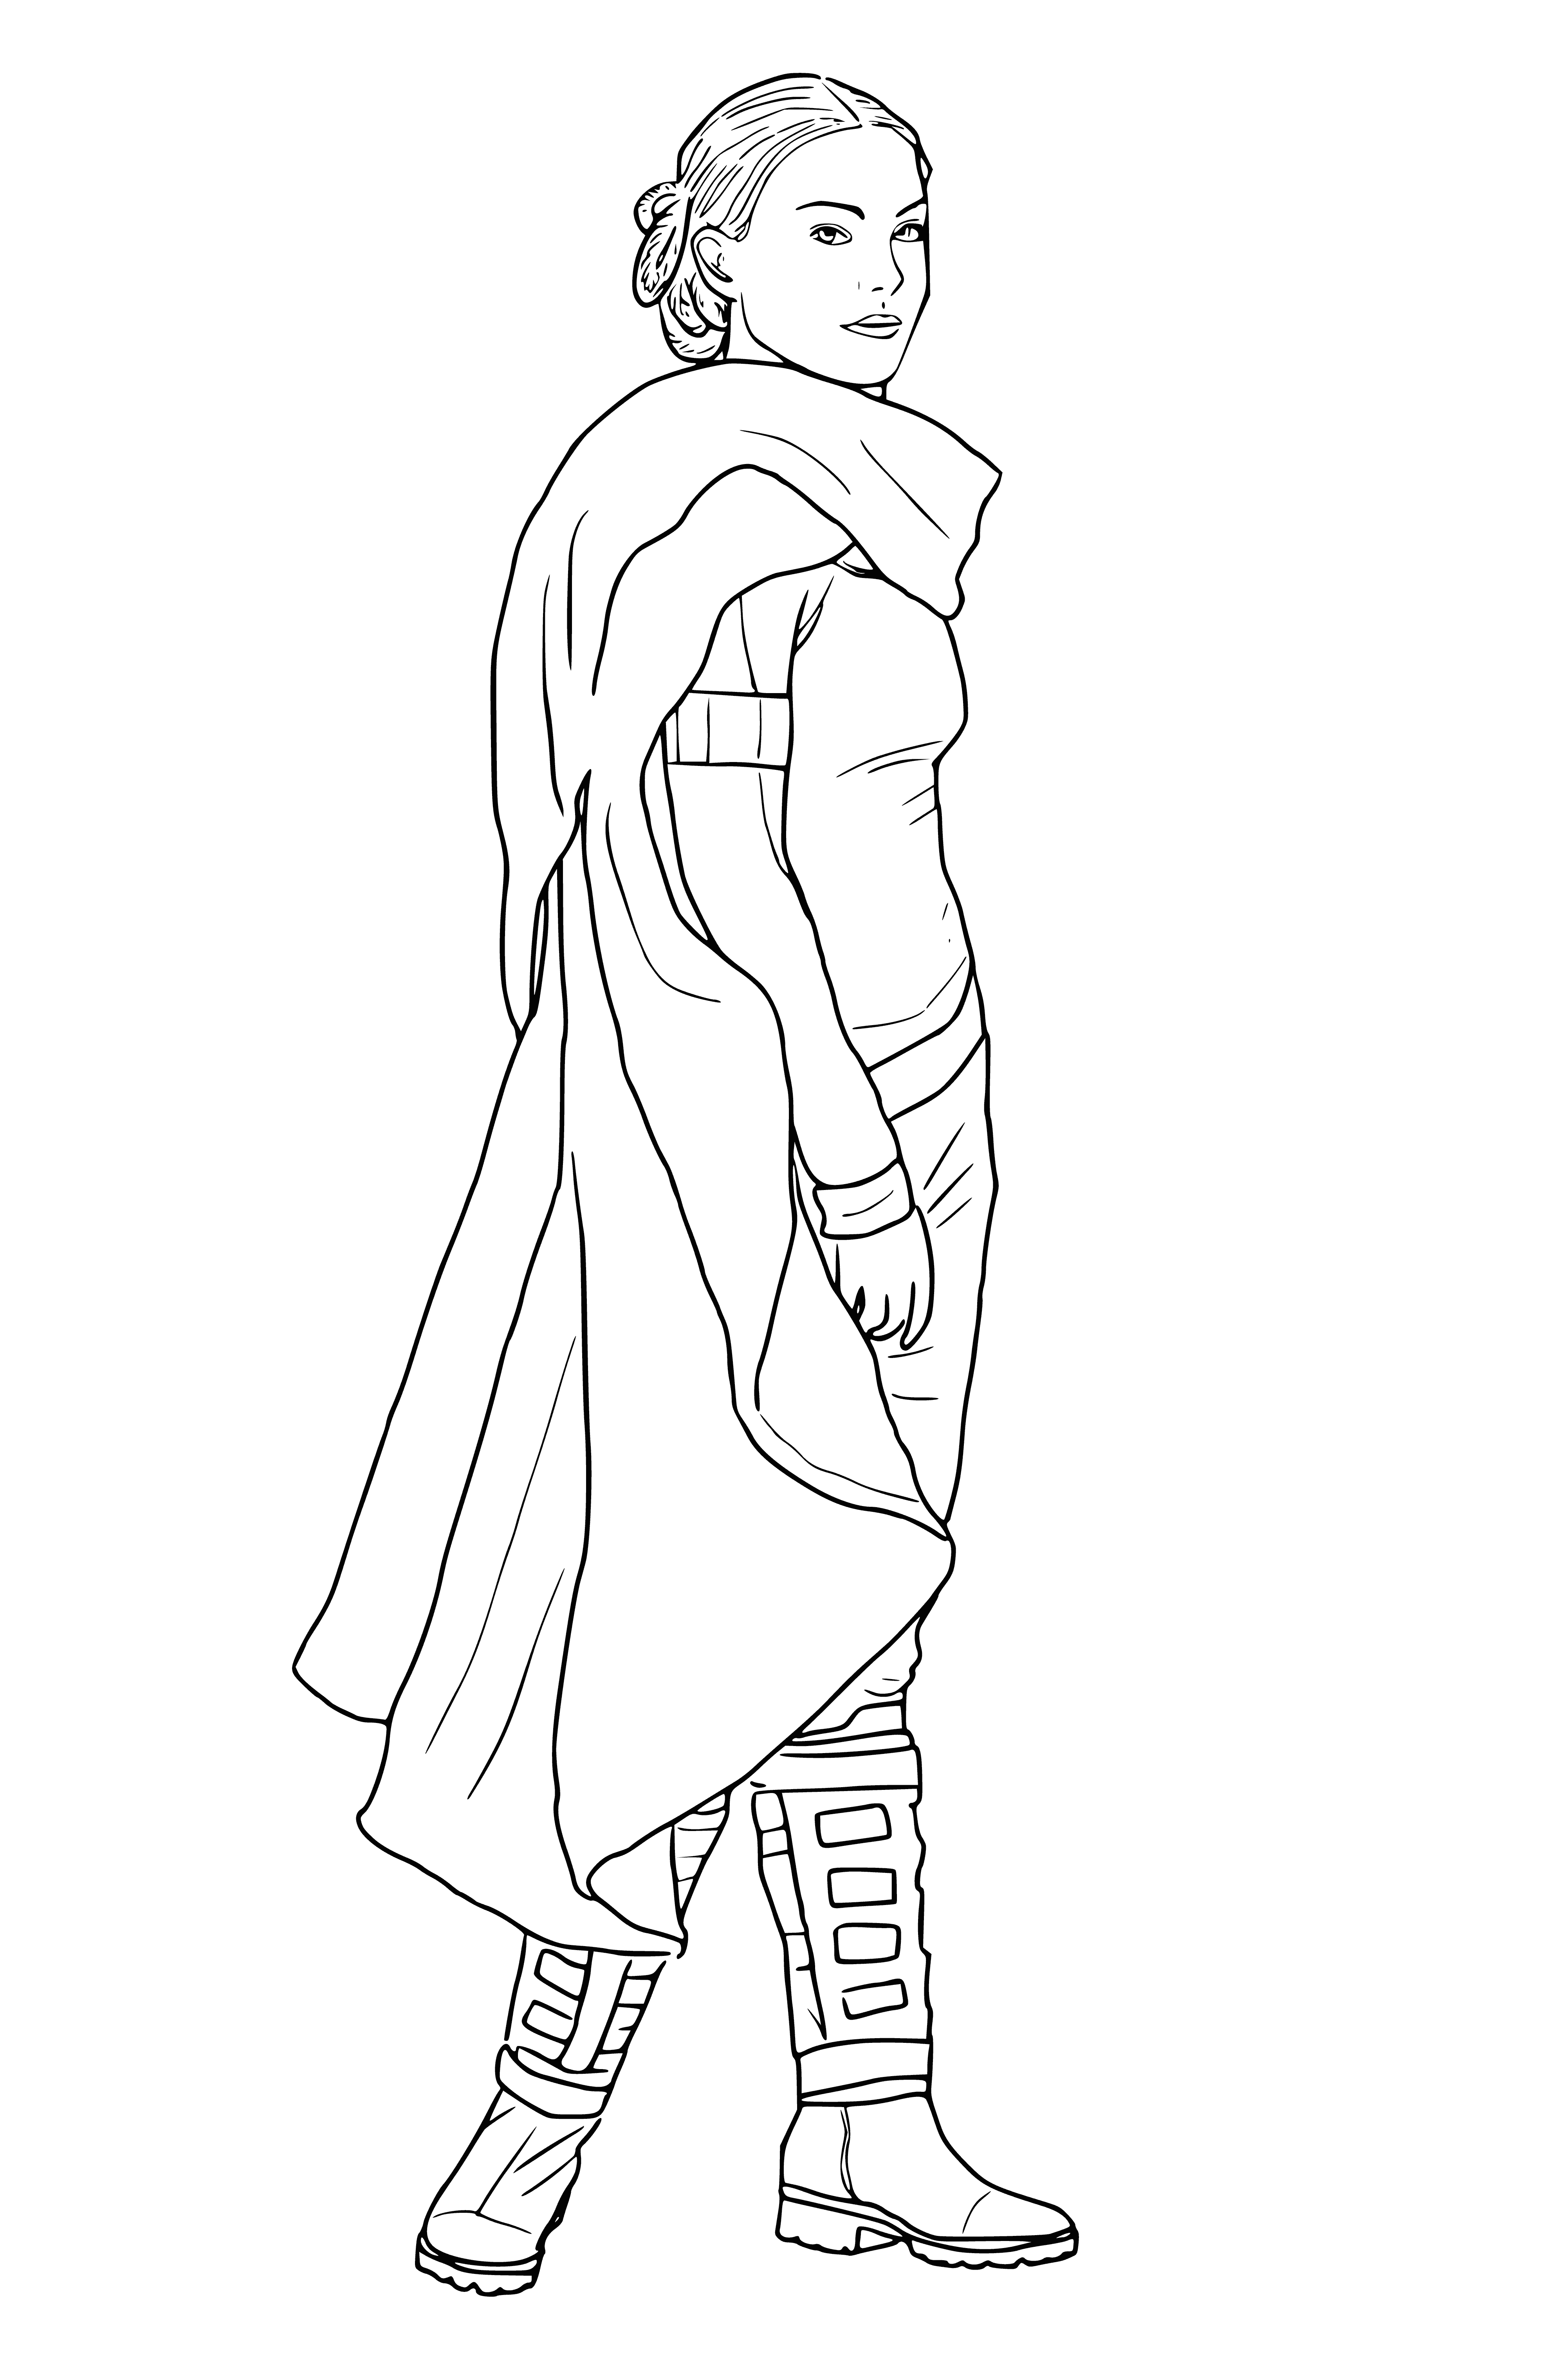 coloring page: Coloring page of "Star Wars: Episode II - Attack of the Clones": Padme Amidala in fighting stance with blaster, stars and planets in background, yellow font title.